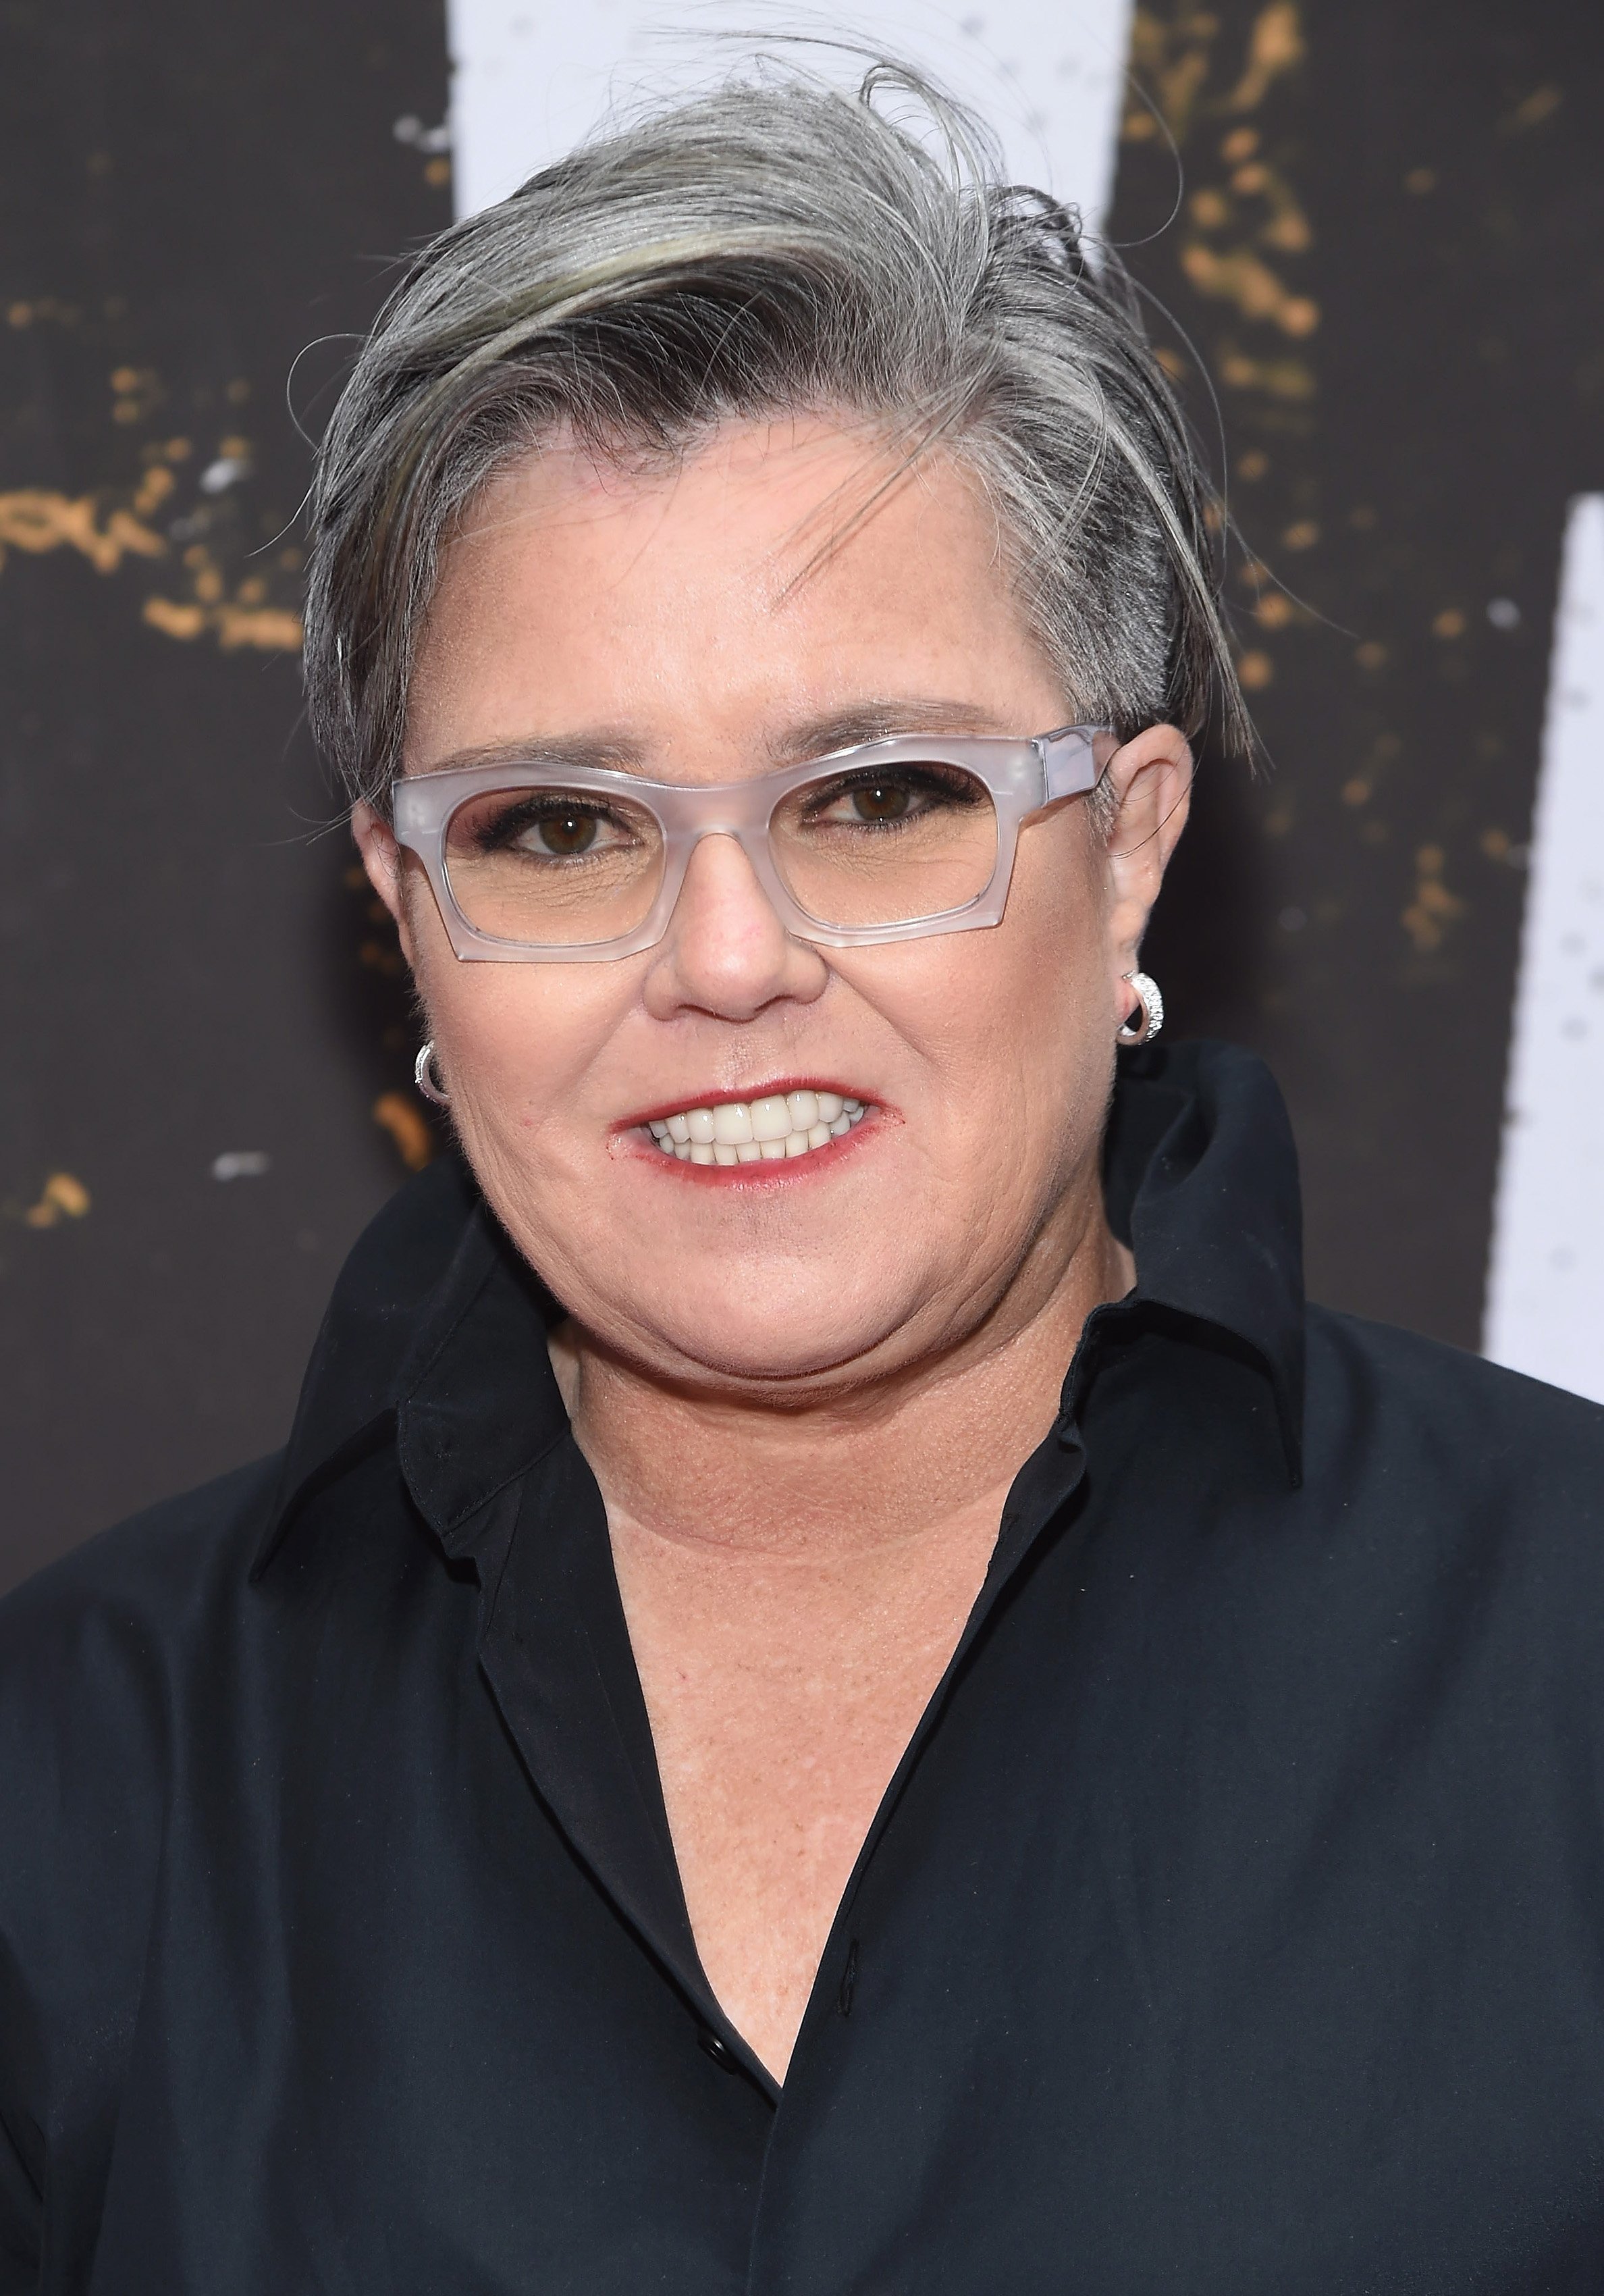 Rosie O'Donnell attends the Broadway opening night of 'Oklahoma' at Circle in the Square Theatre on April 07, 2019 in New York City. | Photo: Getty Images